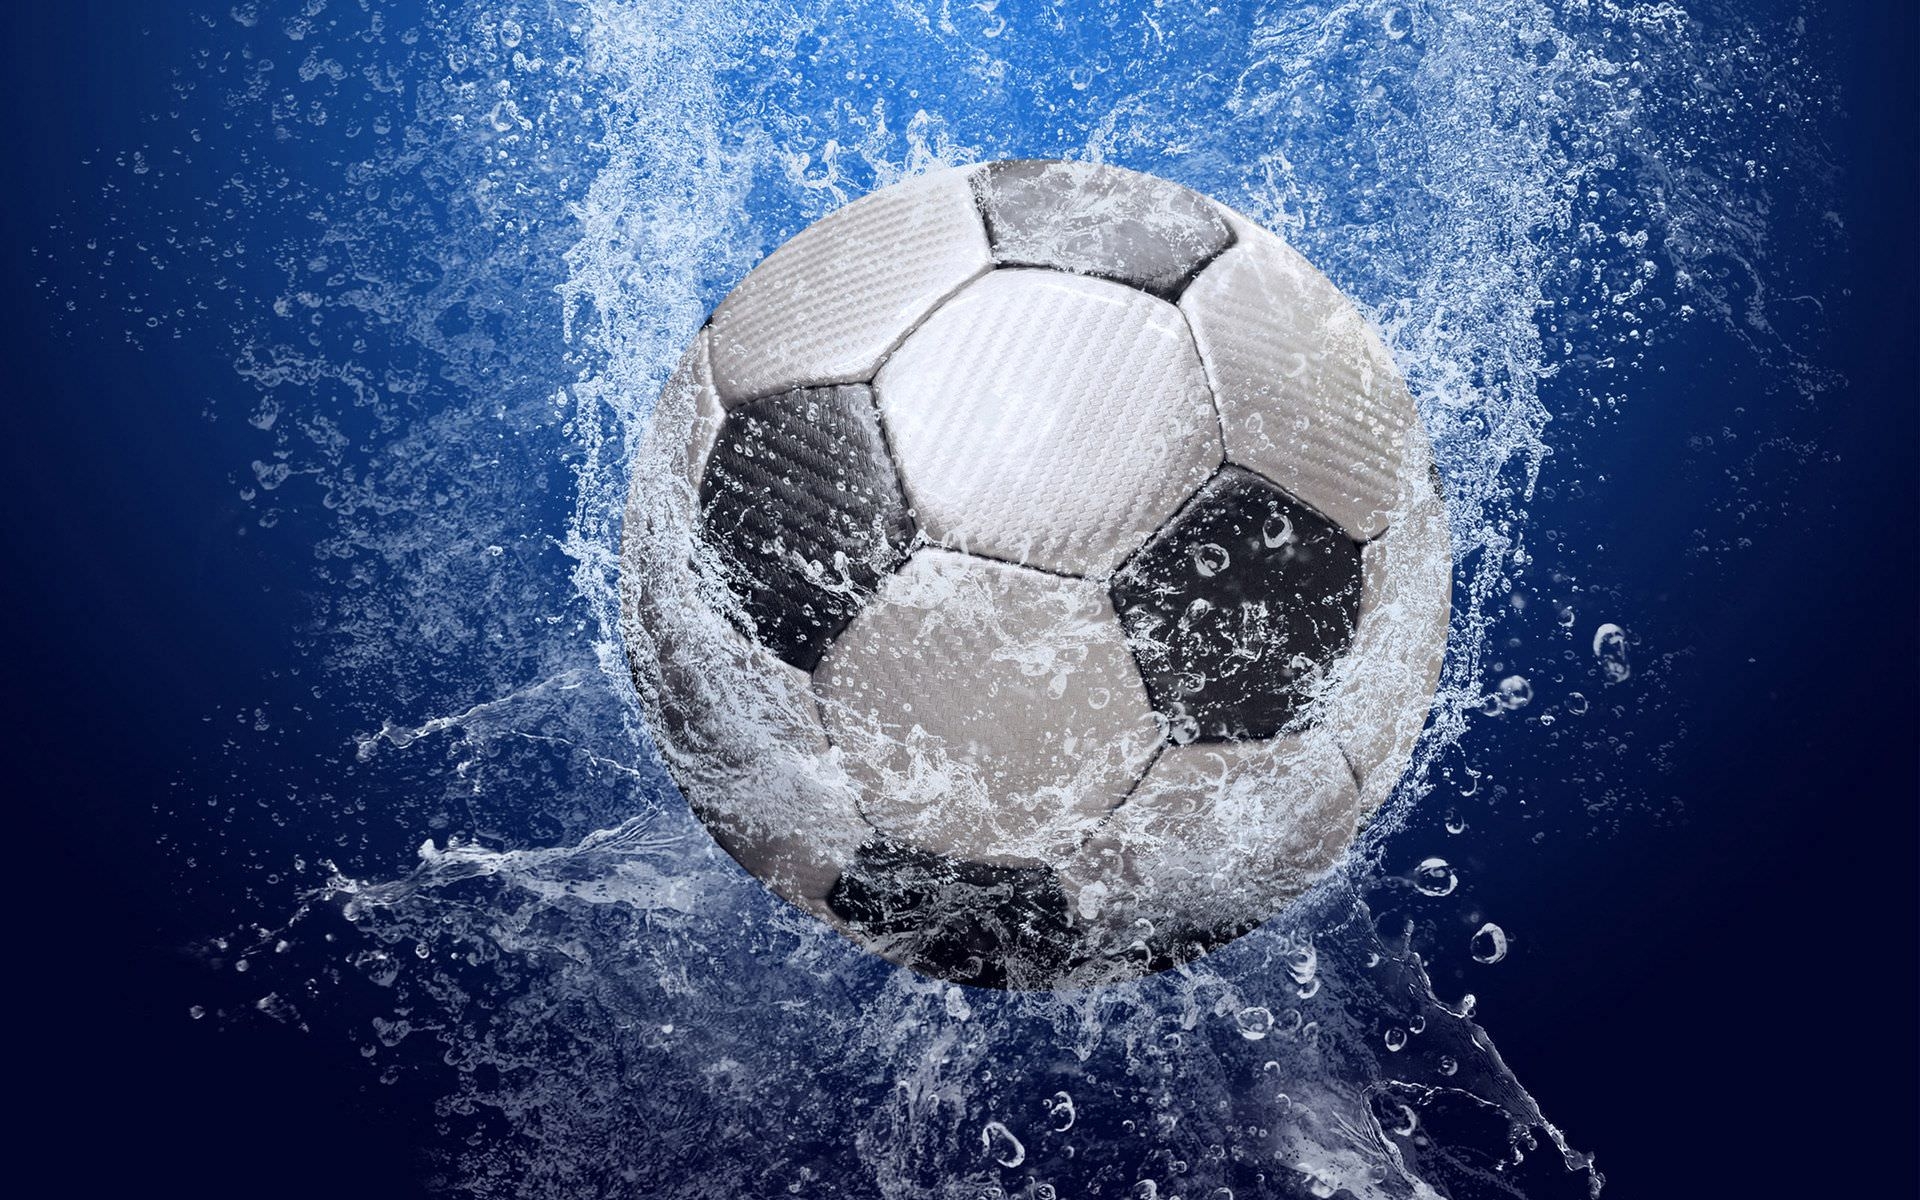 Soccer Free Wallpapers